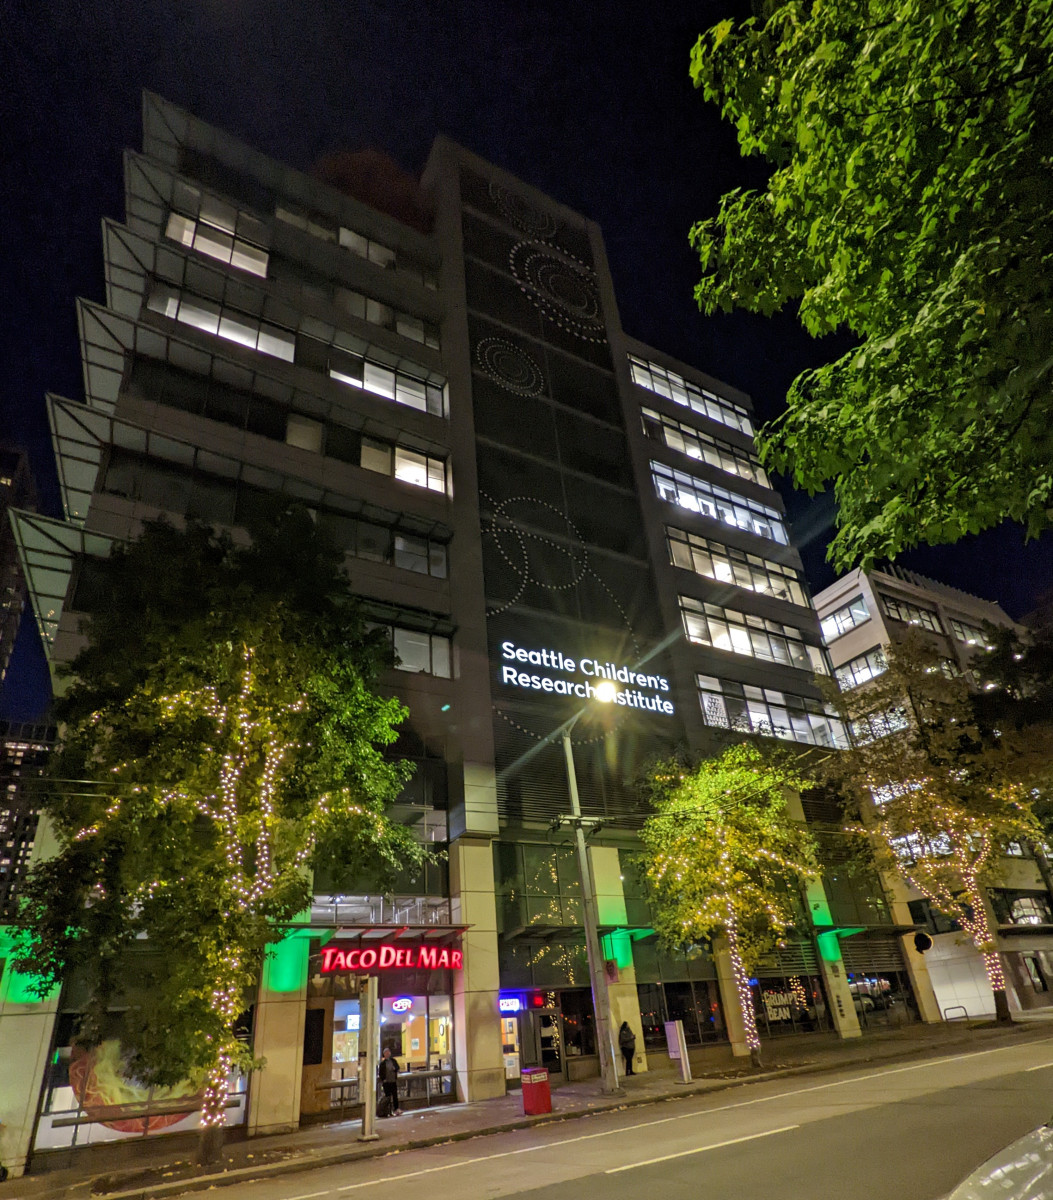 Seattle Children’s Research Institute (Jack R. MacDonald building) illuminated in green in honor of National Injury Prevention Day.